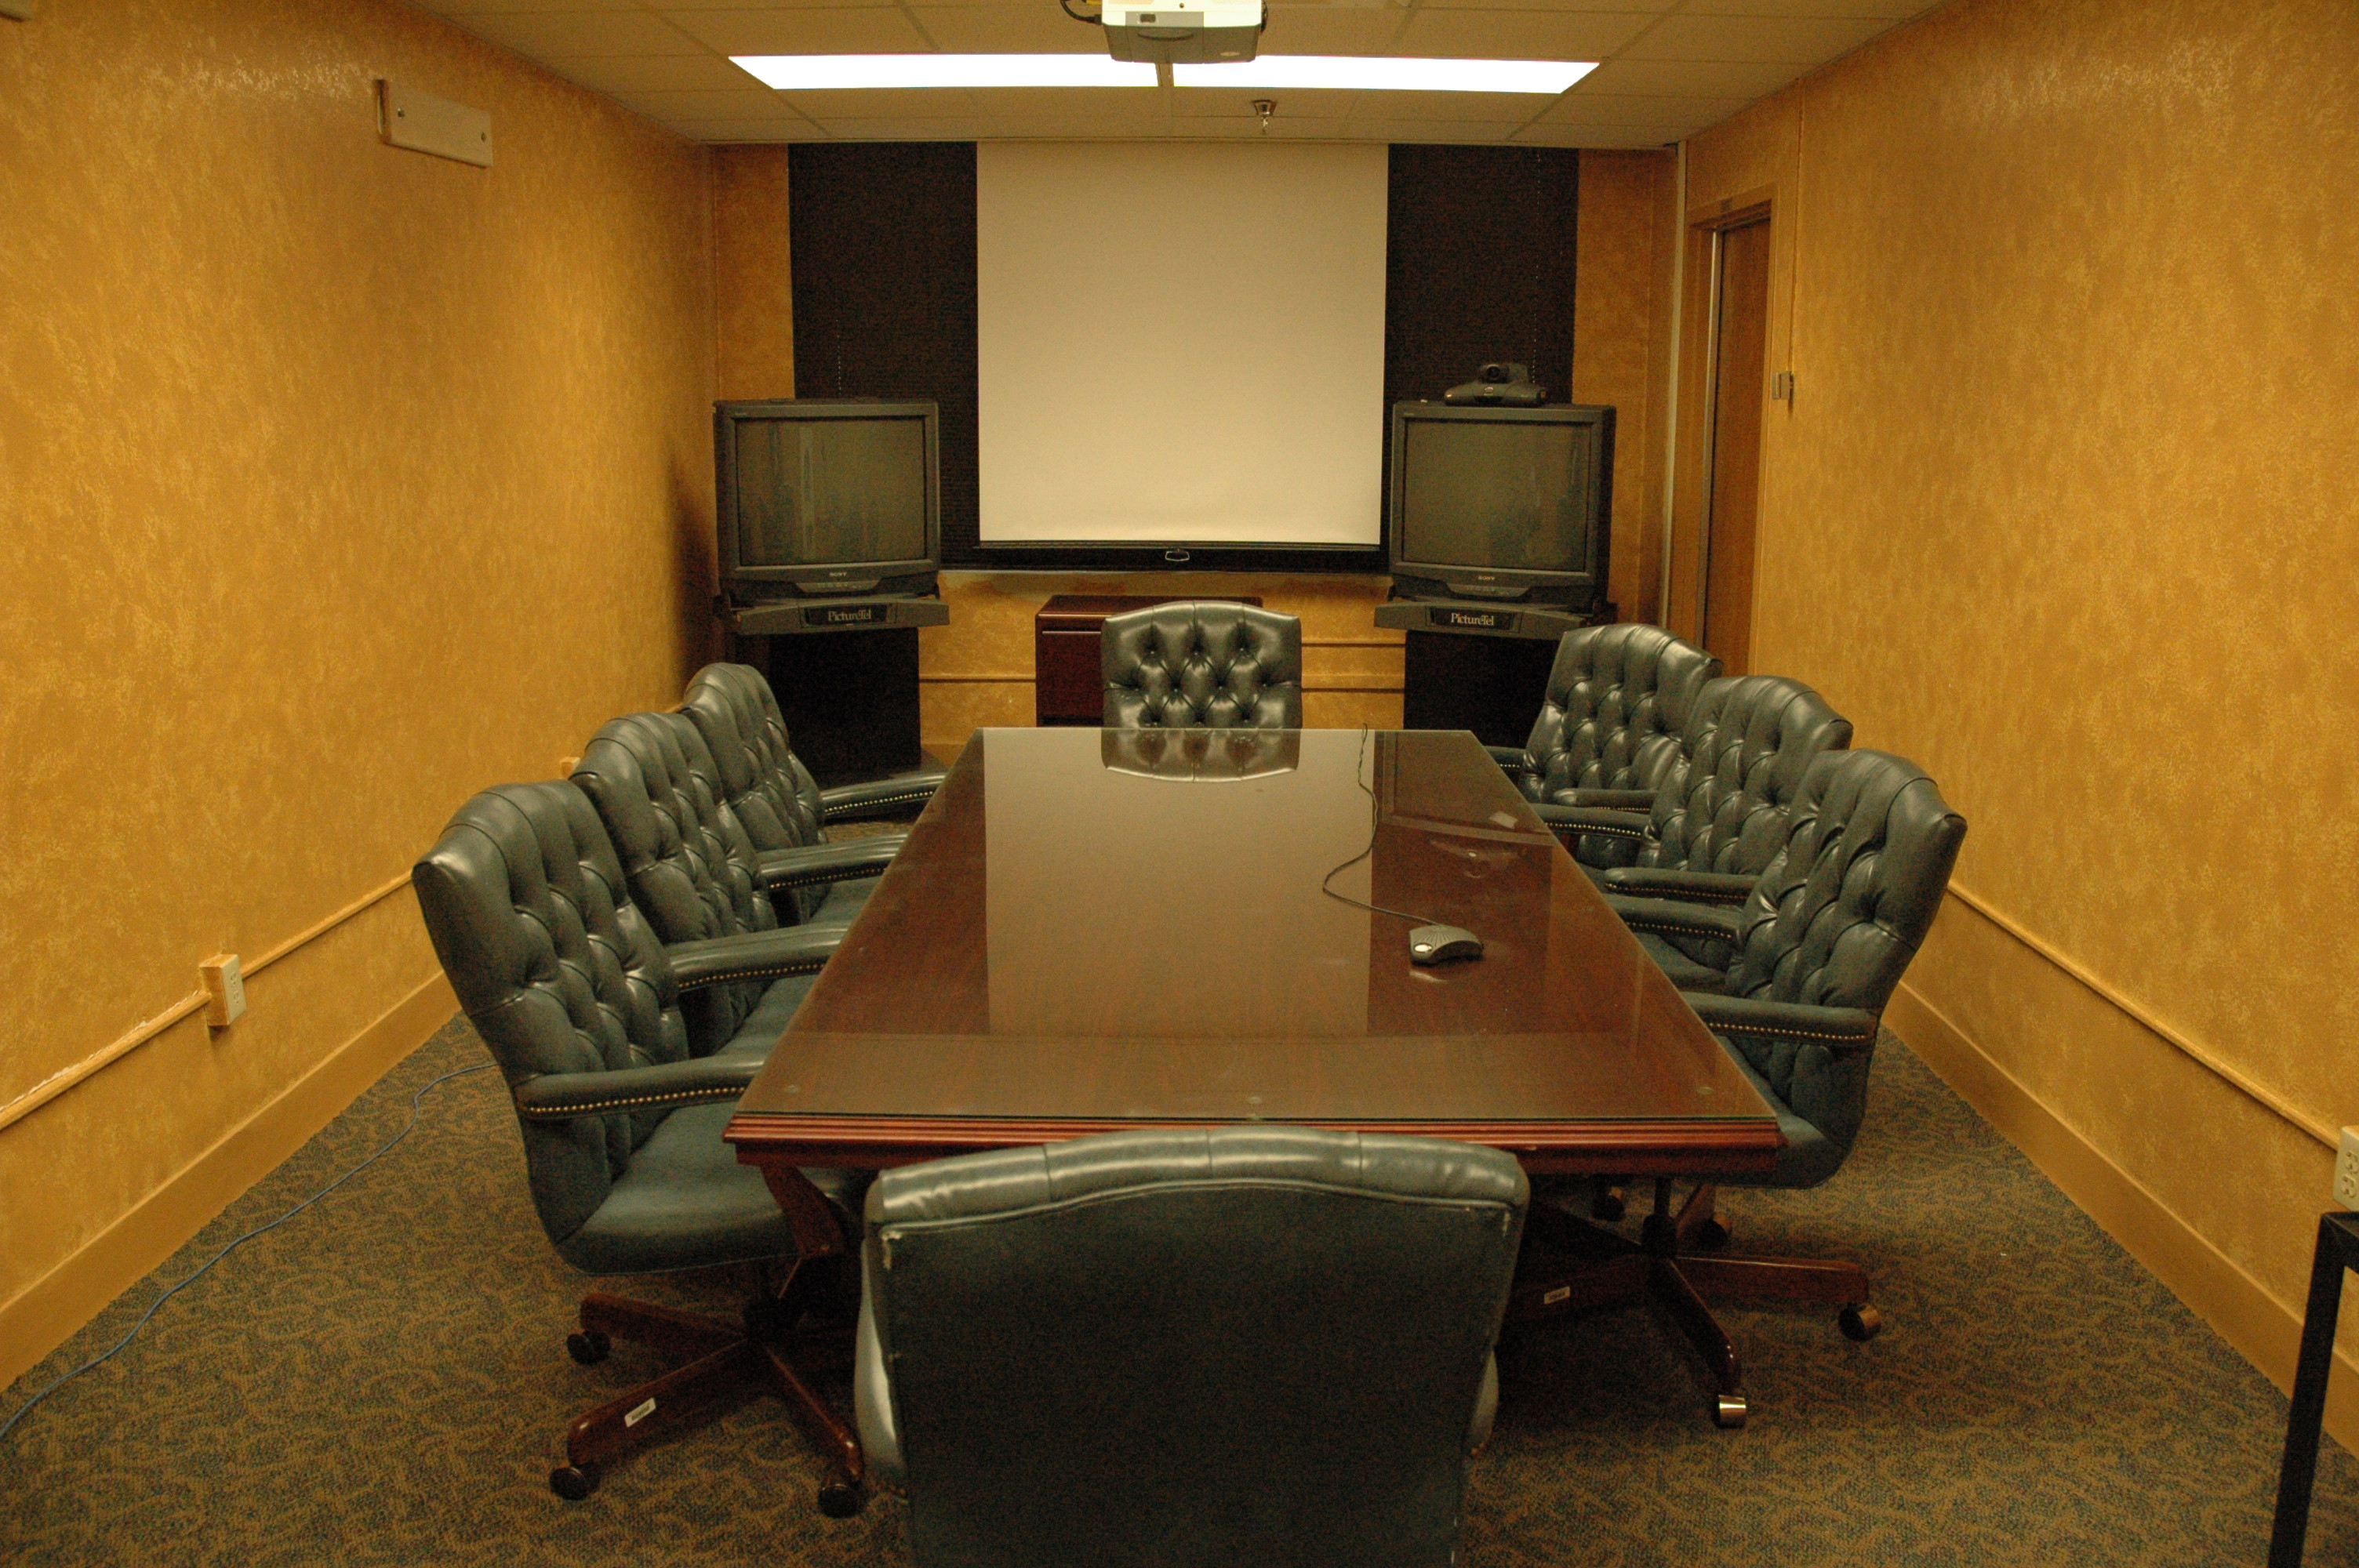 view from the front of the video conference room.